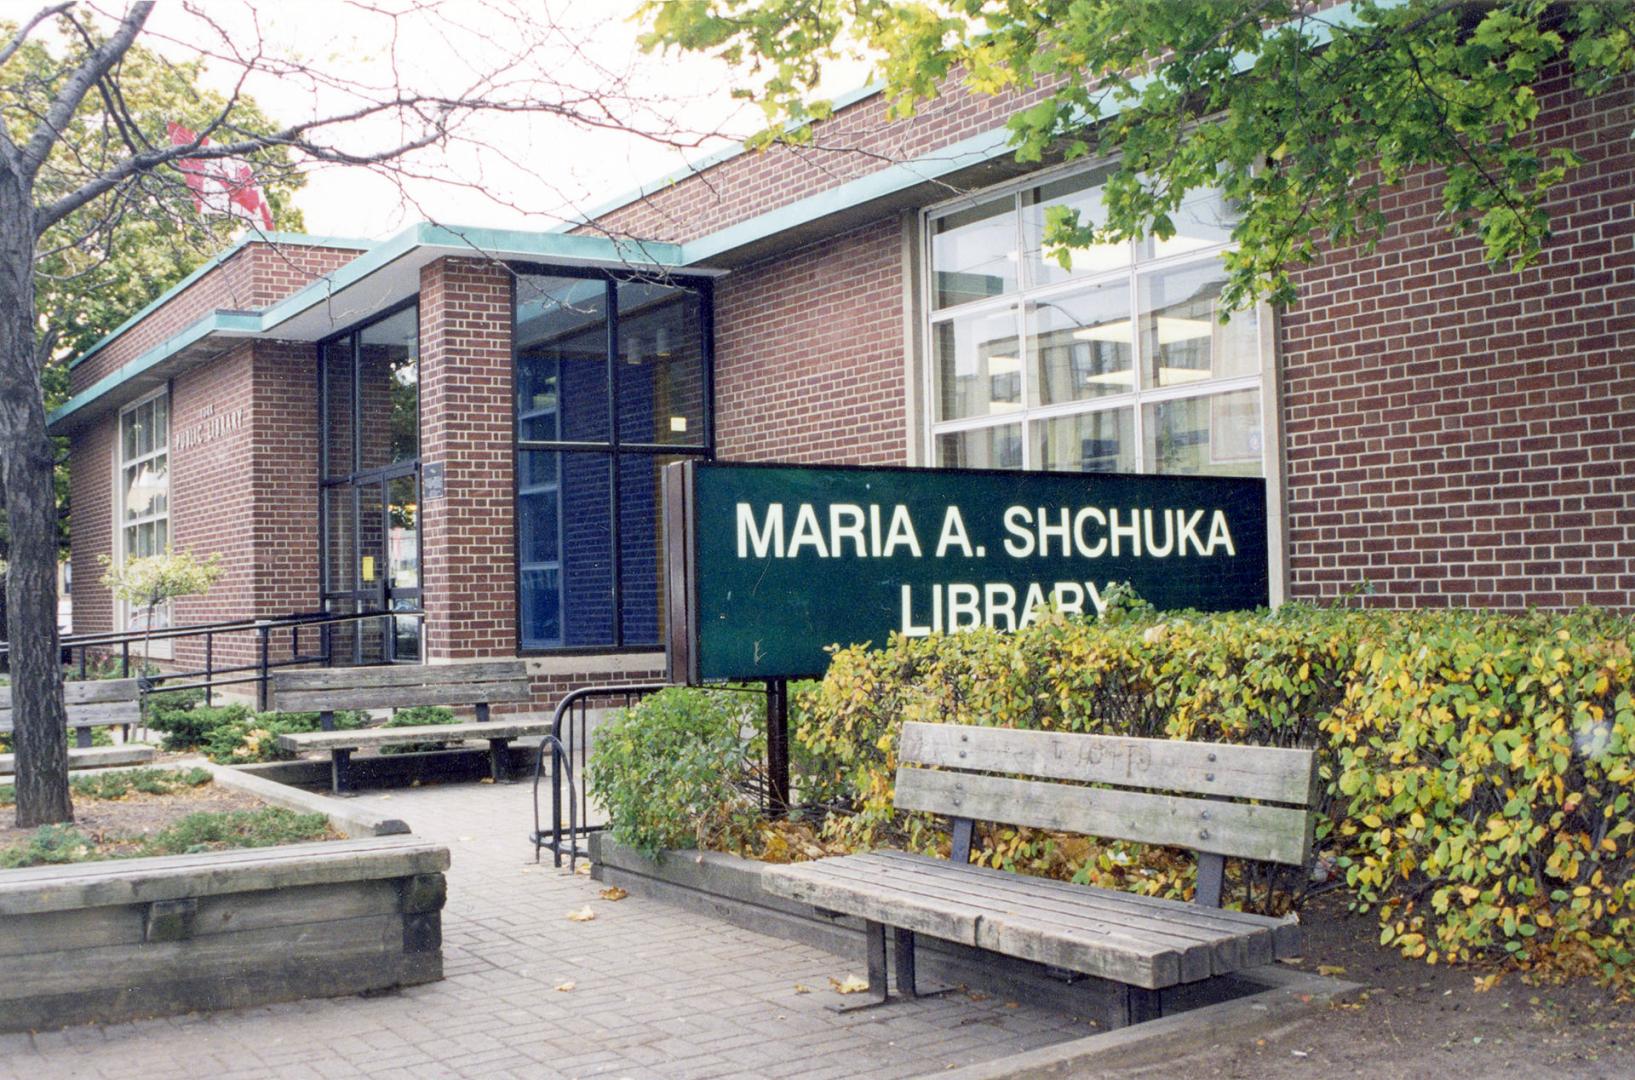 Picture of one storey brick library building. 